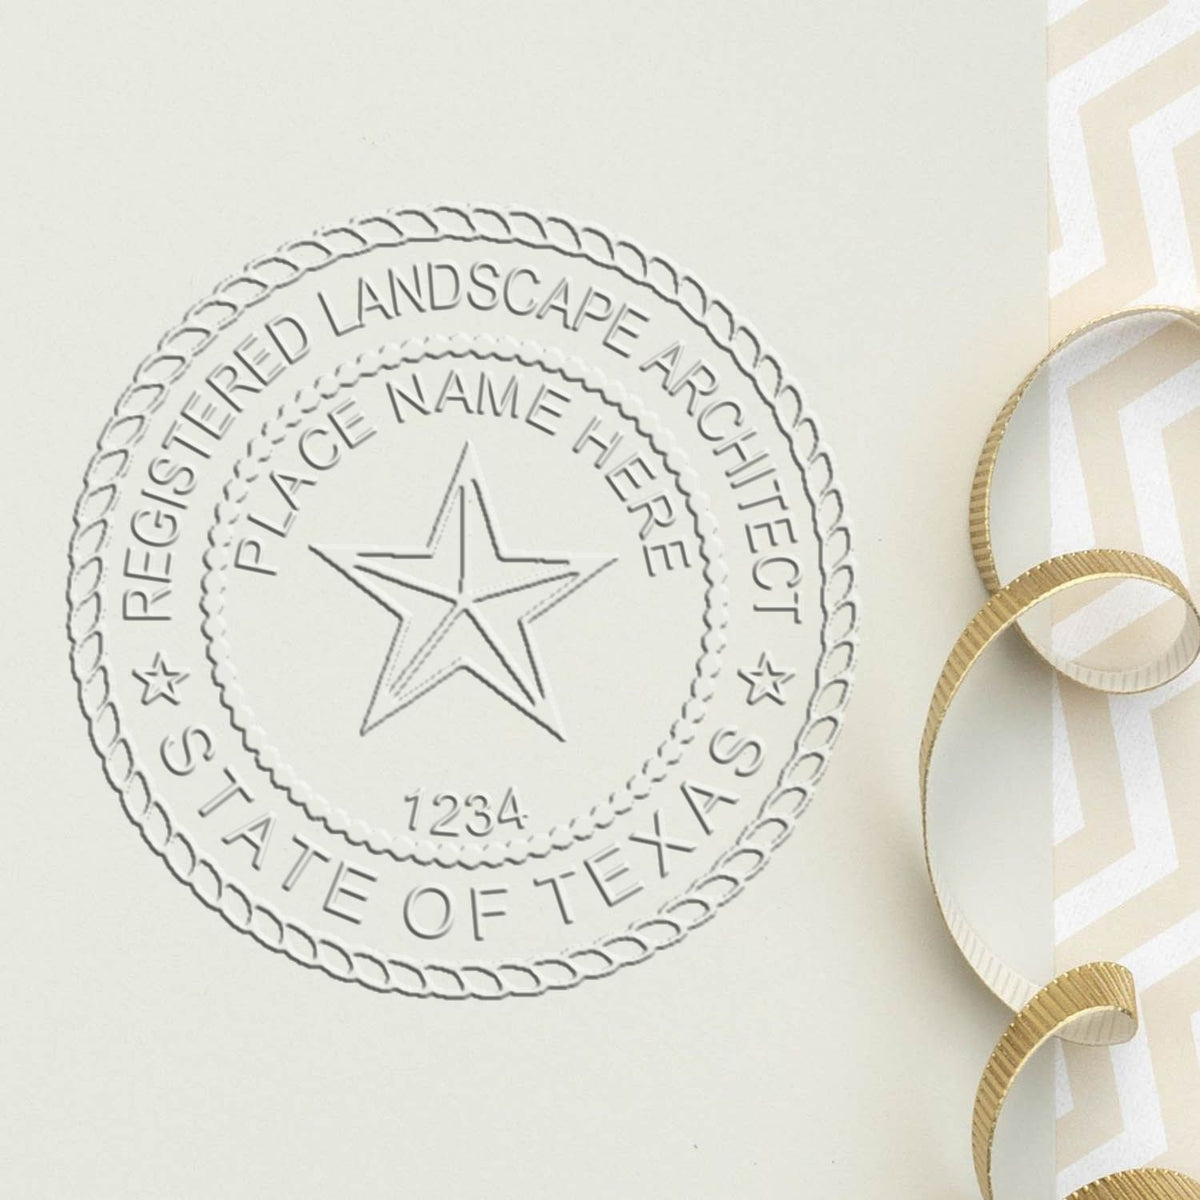 The Soft Pocket Texas Landscape Architect Embosser stamp impression comes to life with a crisp, detailed photo on paper - showcasing true professional quality.